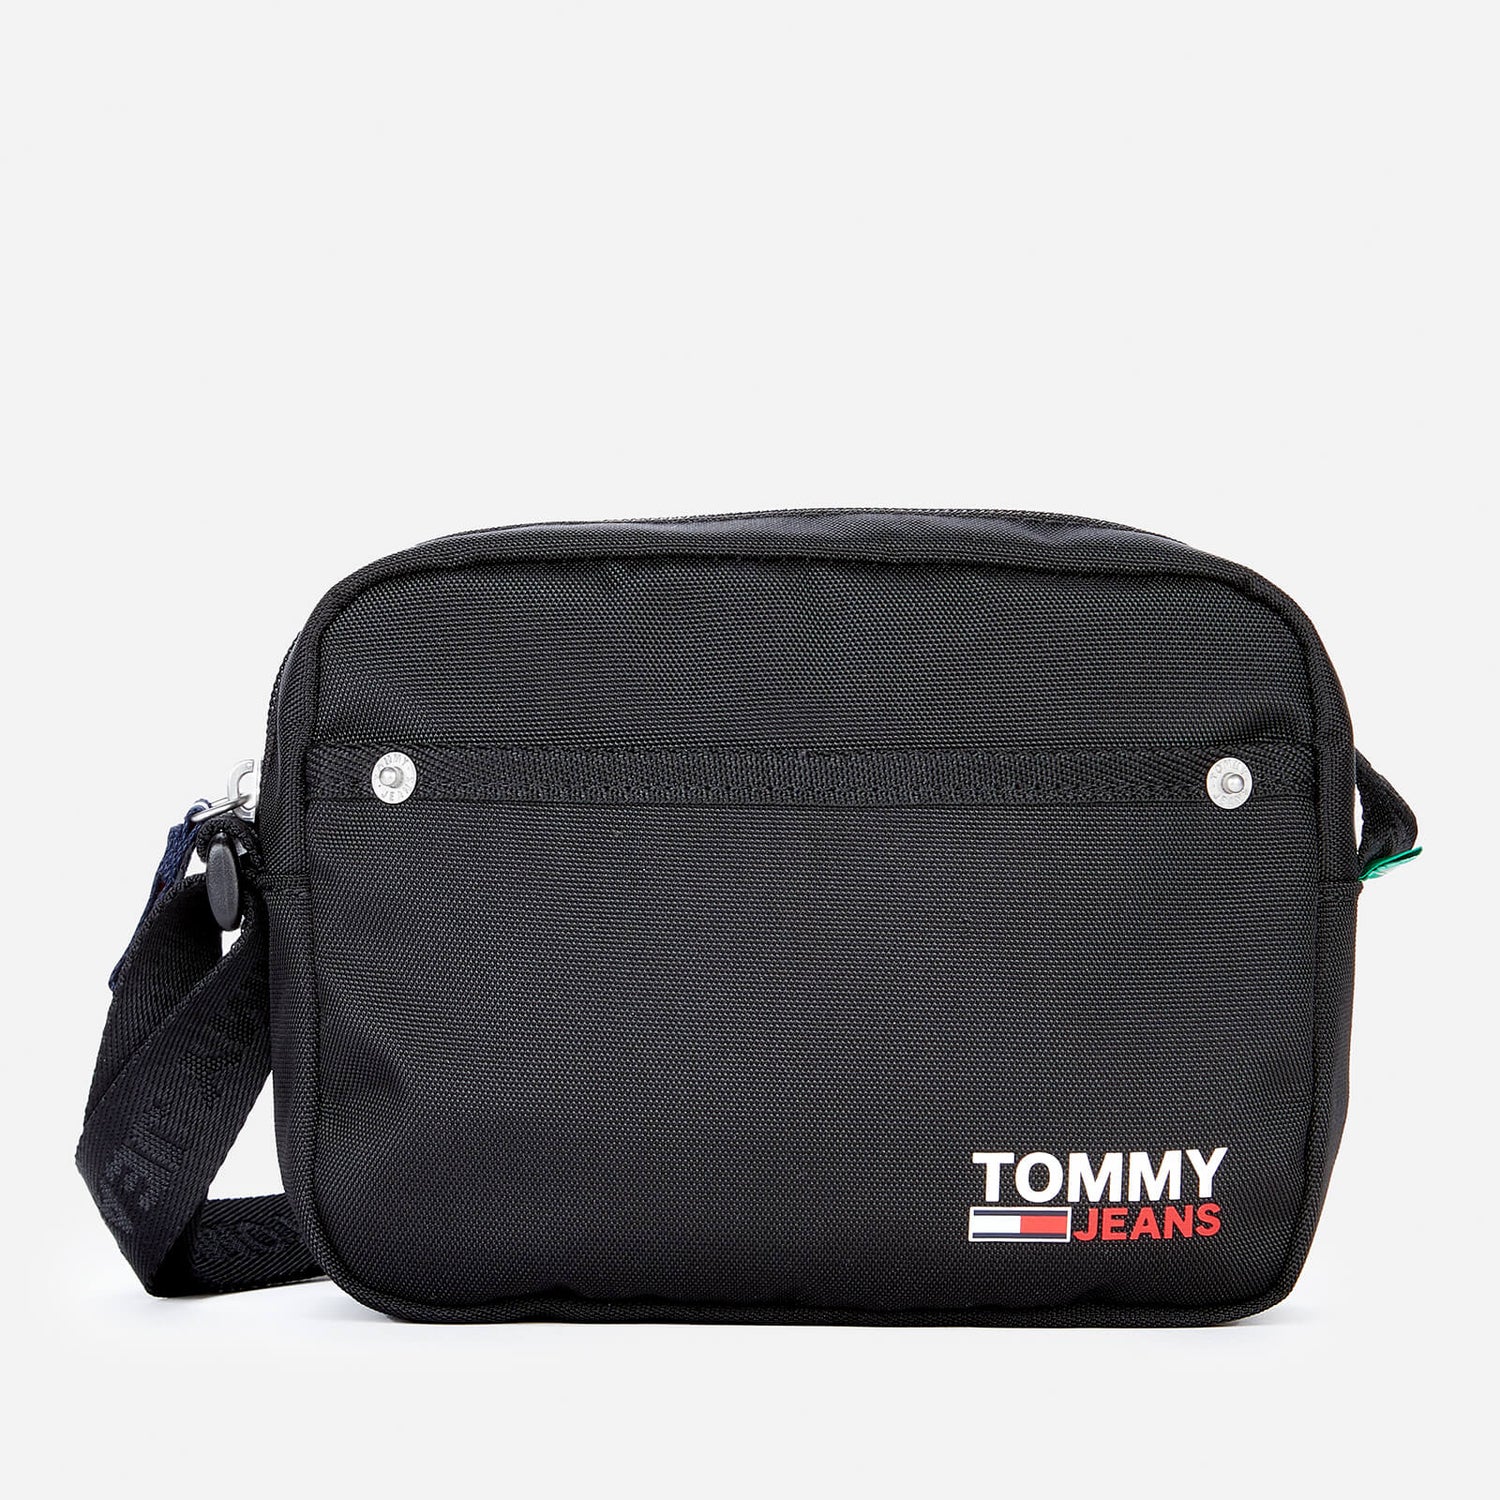 Tommy Jeans Women's Tjw Campus Crossover Bag - Black